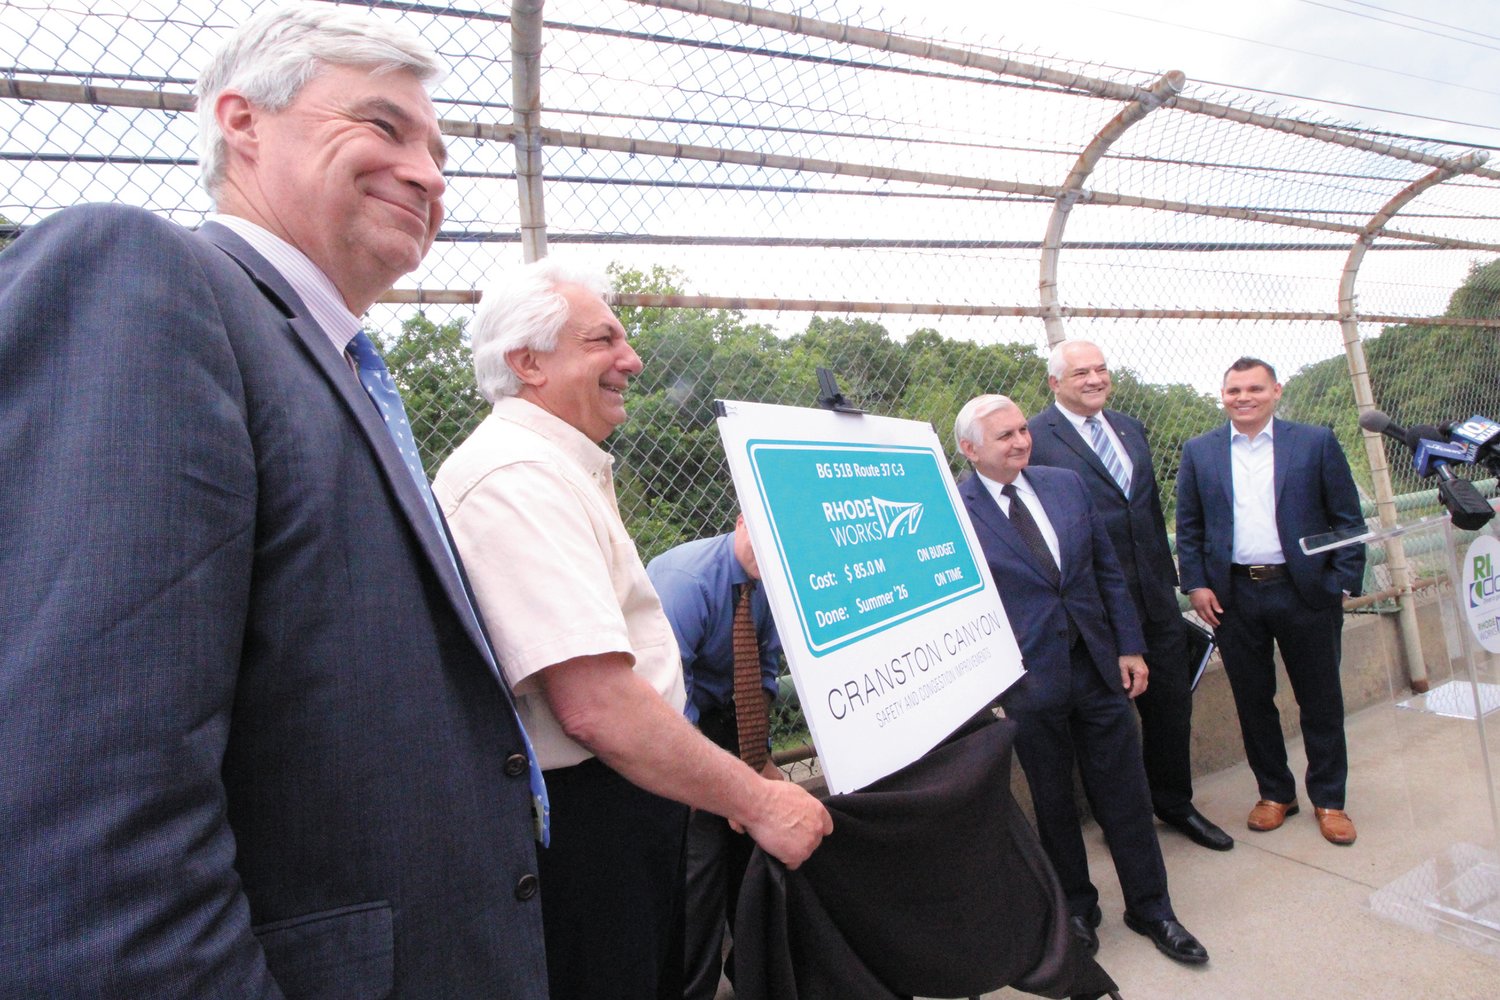 SIGNS OF WORK TO COME: On the Phenix Ave. bridge in Cranston overlooking Route 295, state and federal officials gathered Friday to announce the $85 million Cranston Canyon Project. Pictured are Senator Sheldon Whitehouse, DOT Director Peter Alviti, Senator Jack Reed, Carlos Machado, district director of the U. S. Department of Transportation Federal Highway Administration and Rep. Brandon Potter of Cranston. (Beacon photo)